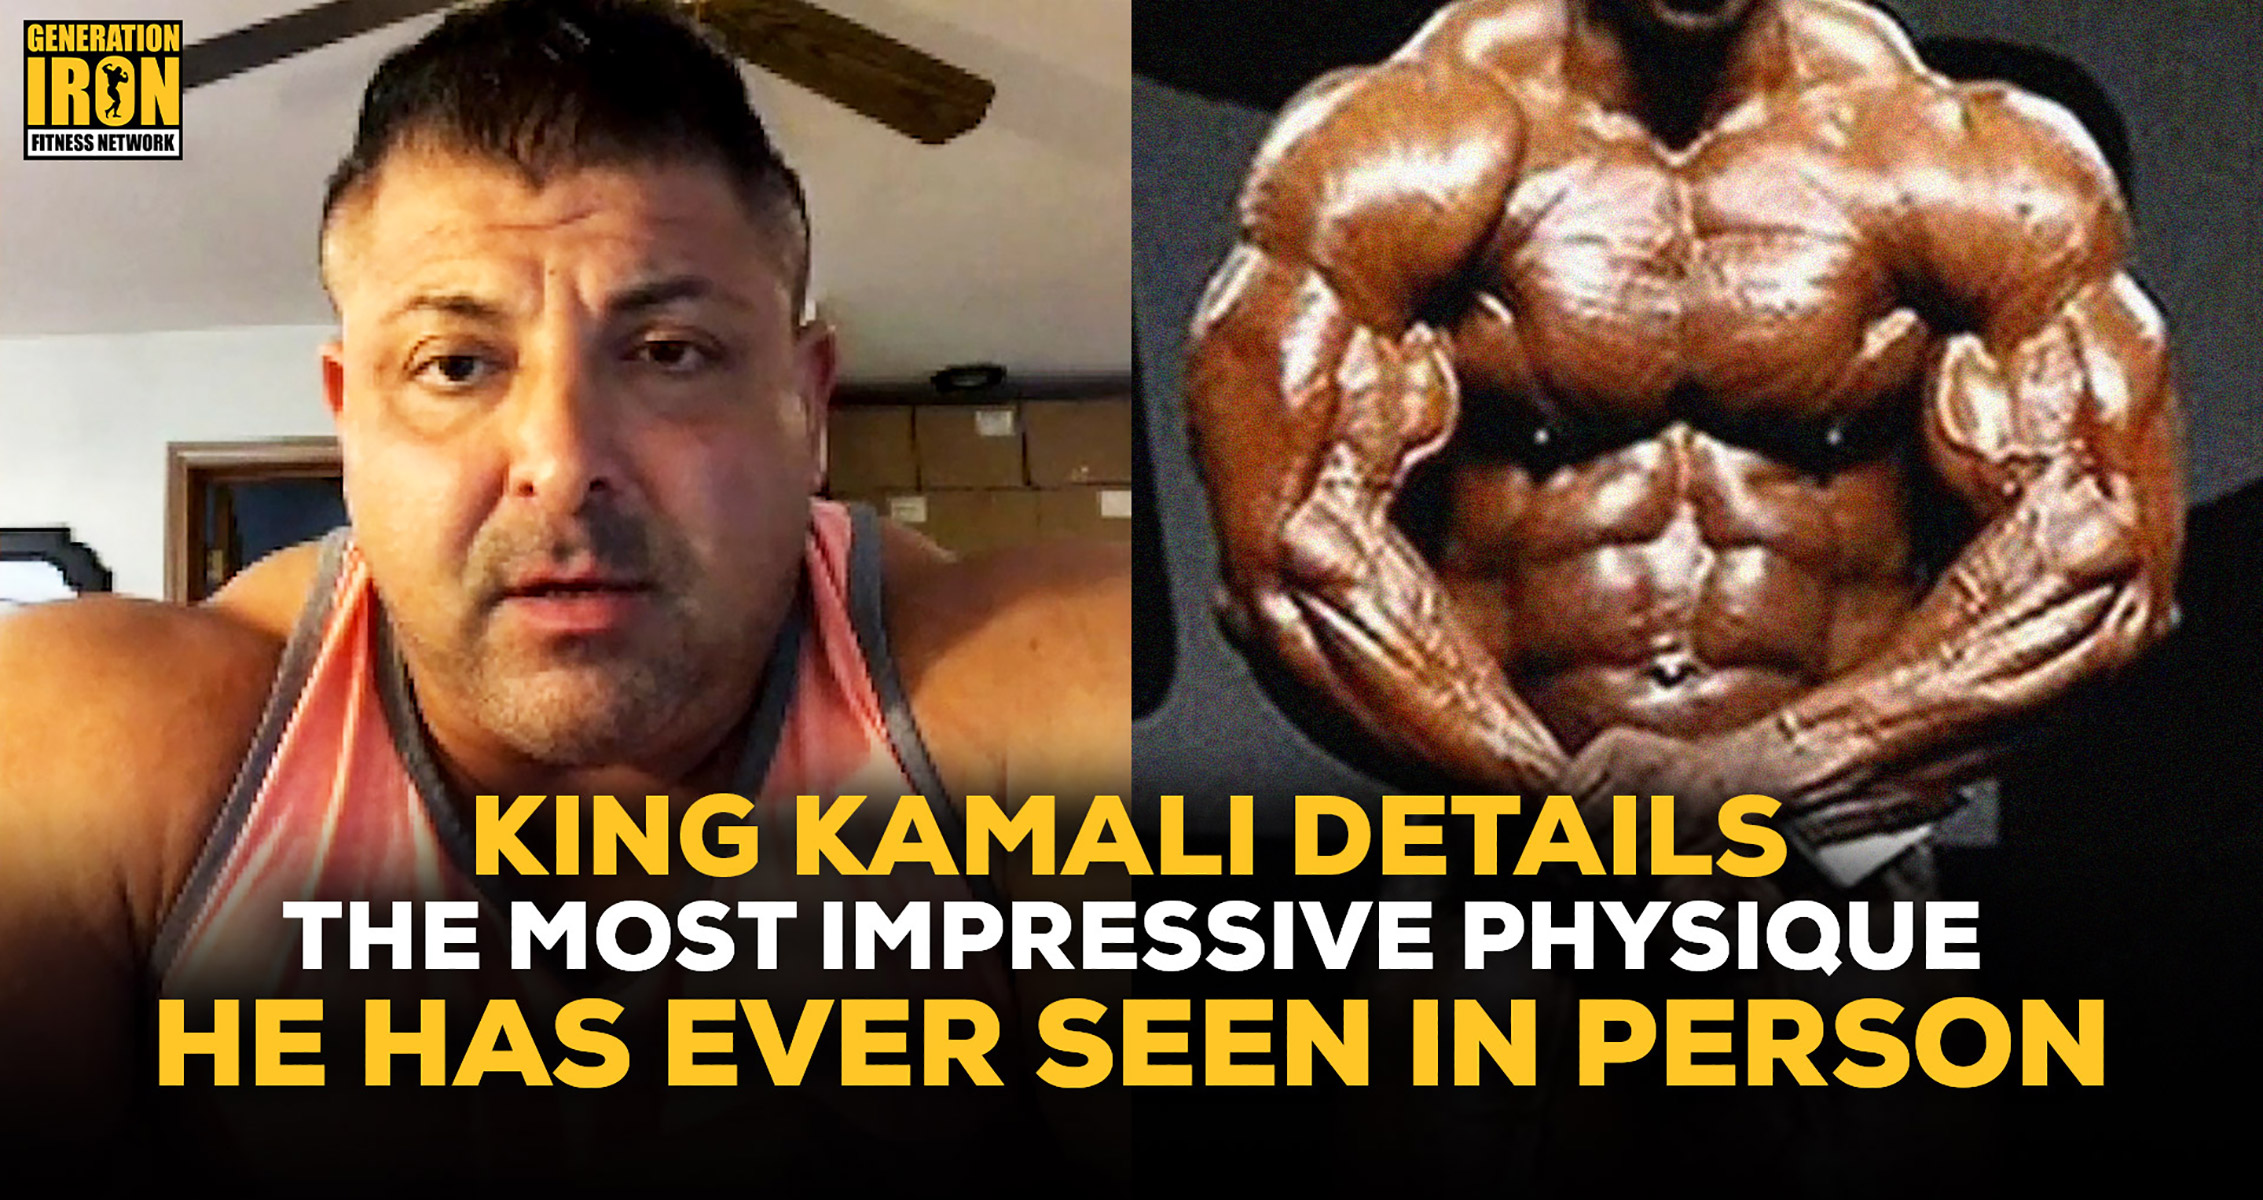 King Kamali Details The Most Impressive Bodybuilding Physique He Had Ever Seen In Person